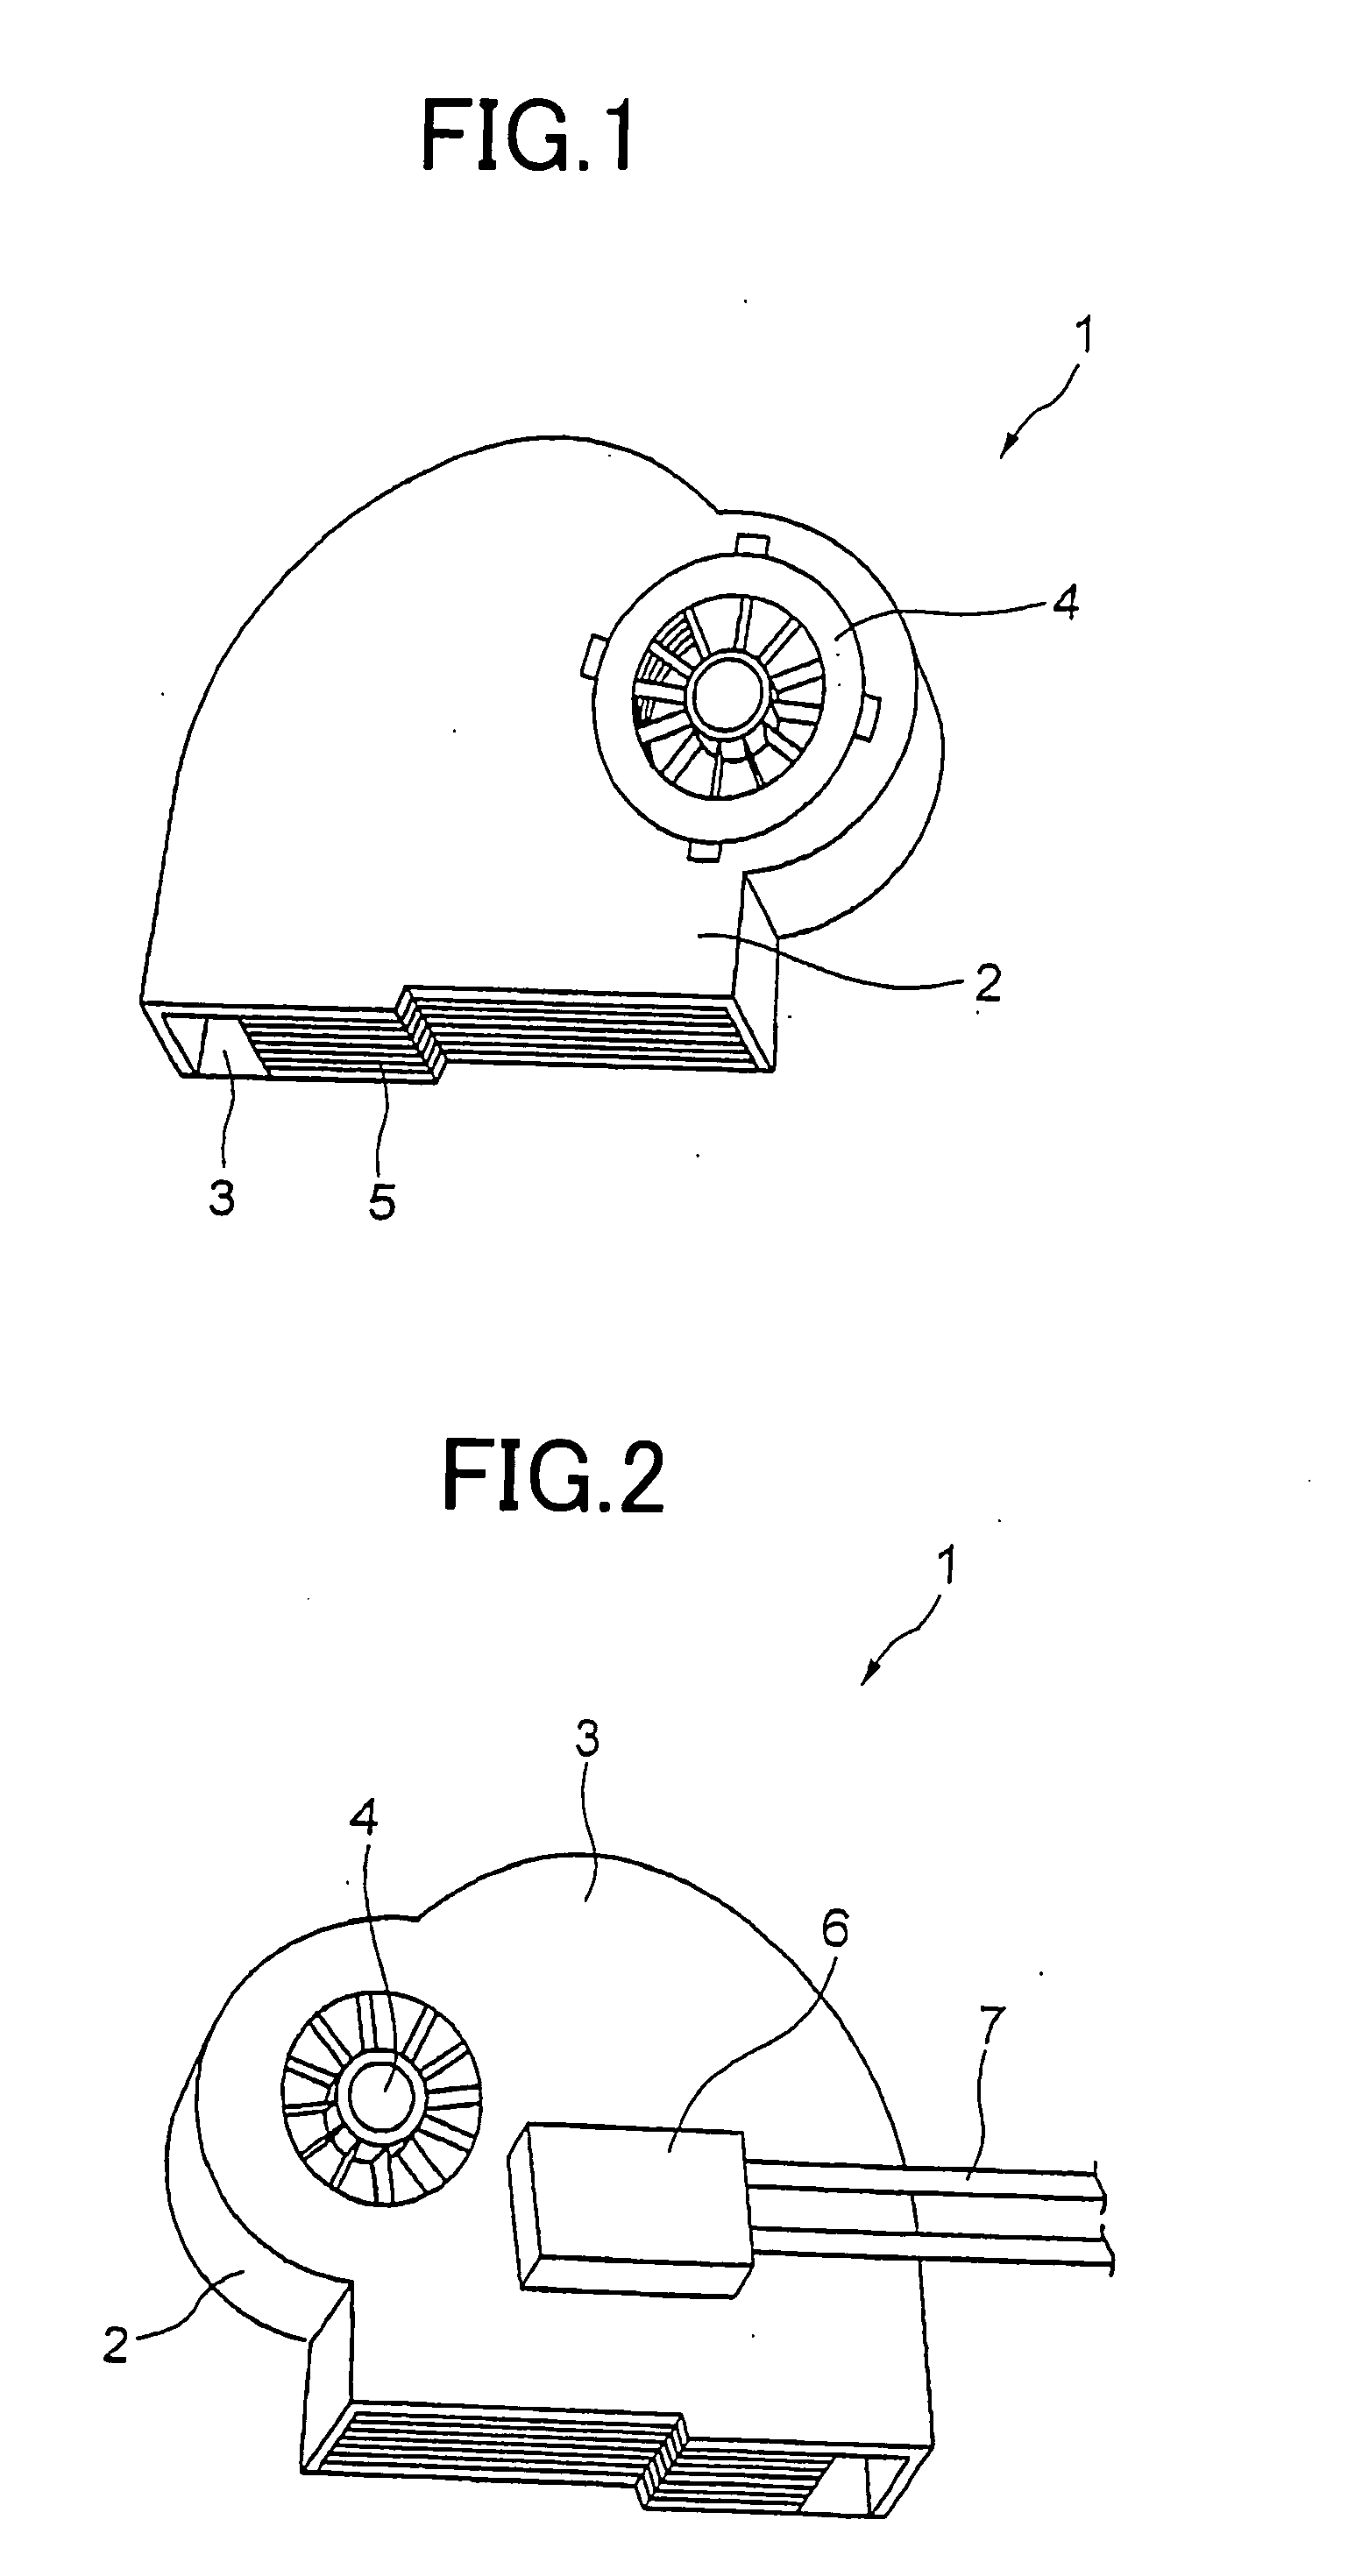 Heat sink with a centrifugal fan